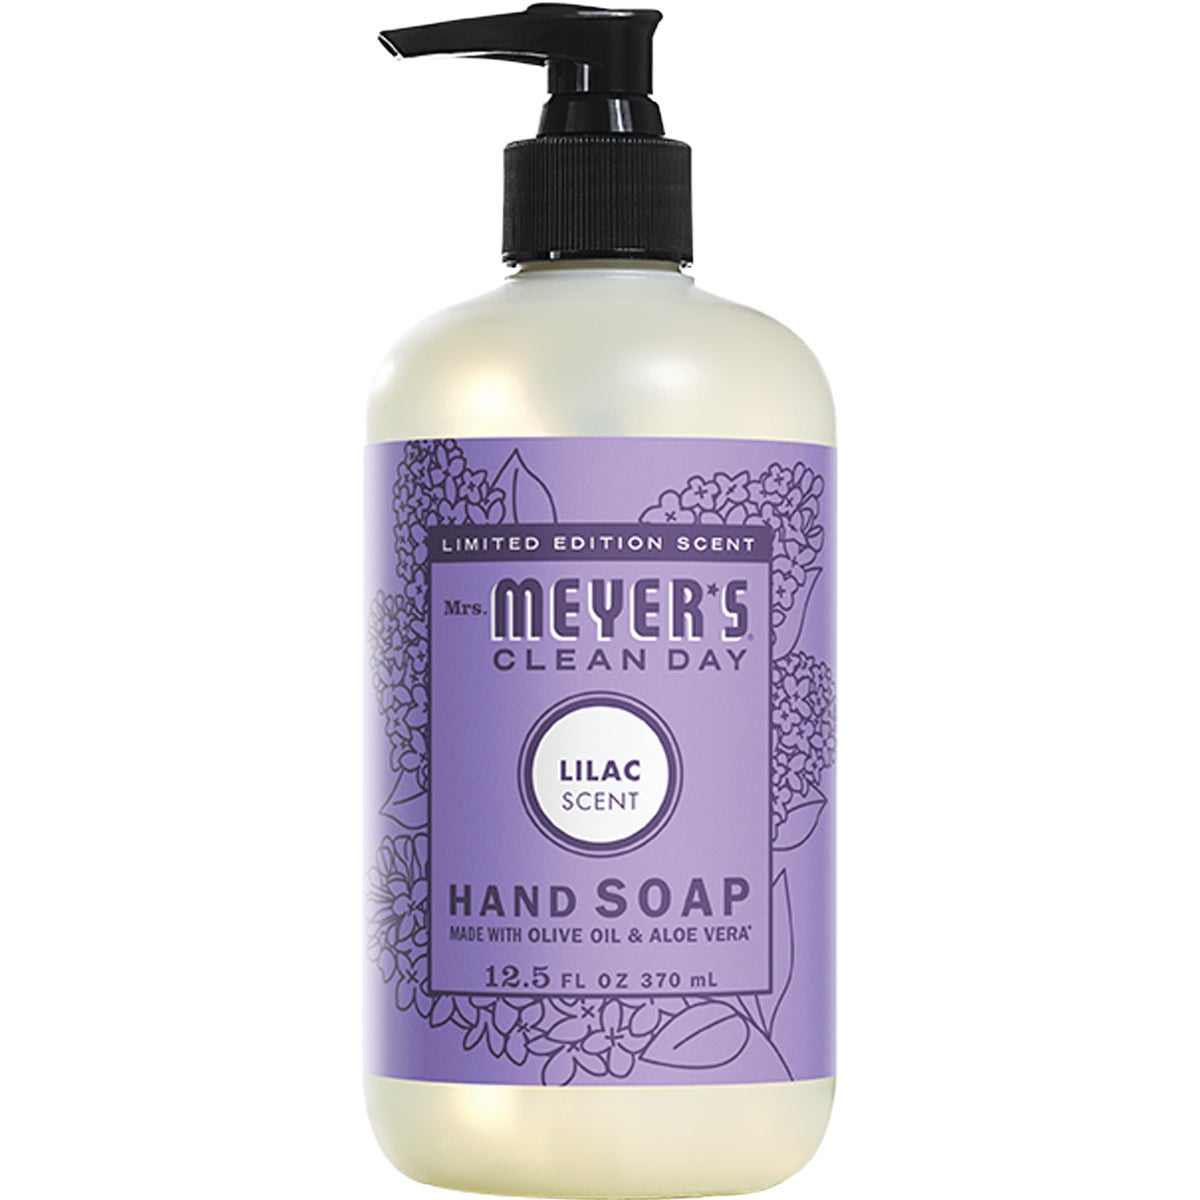 Mrs. Meyer's Clean Day 12.5 Oz. Lilac Liquid Hand Soap